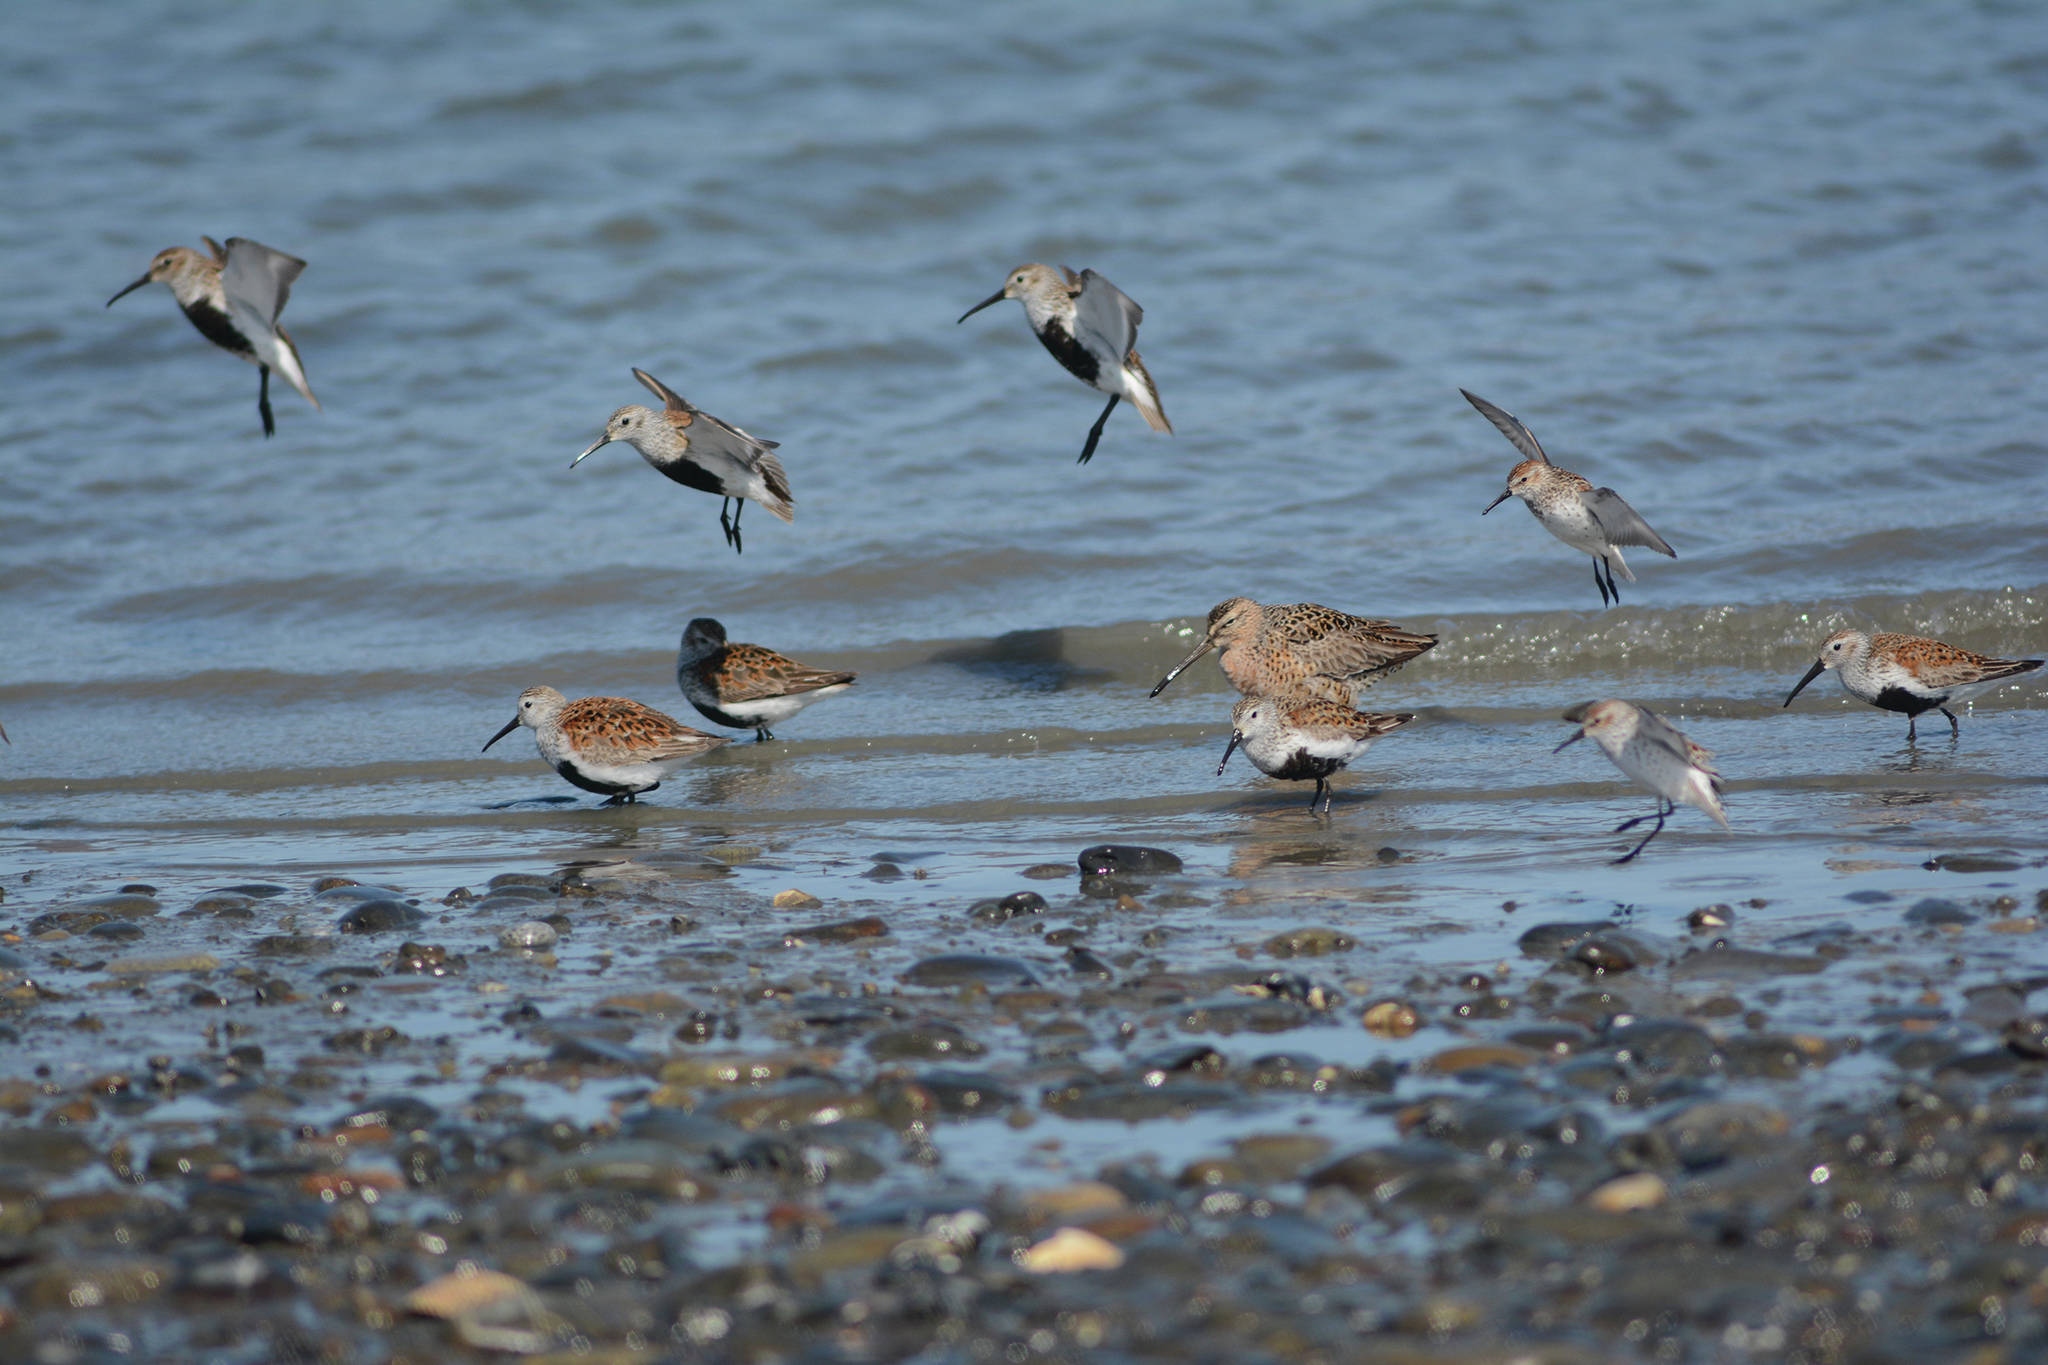 Dunlins, western sandpipers and a dowitcher feed on Saturday, May 2, 2020, on the Homer Spit near Green Timbers in Homer, Alaska. (Photo by Michael Armstrong/Homer News)